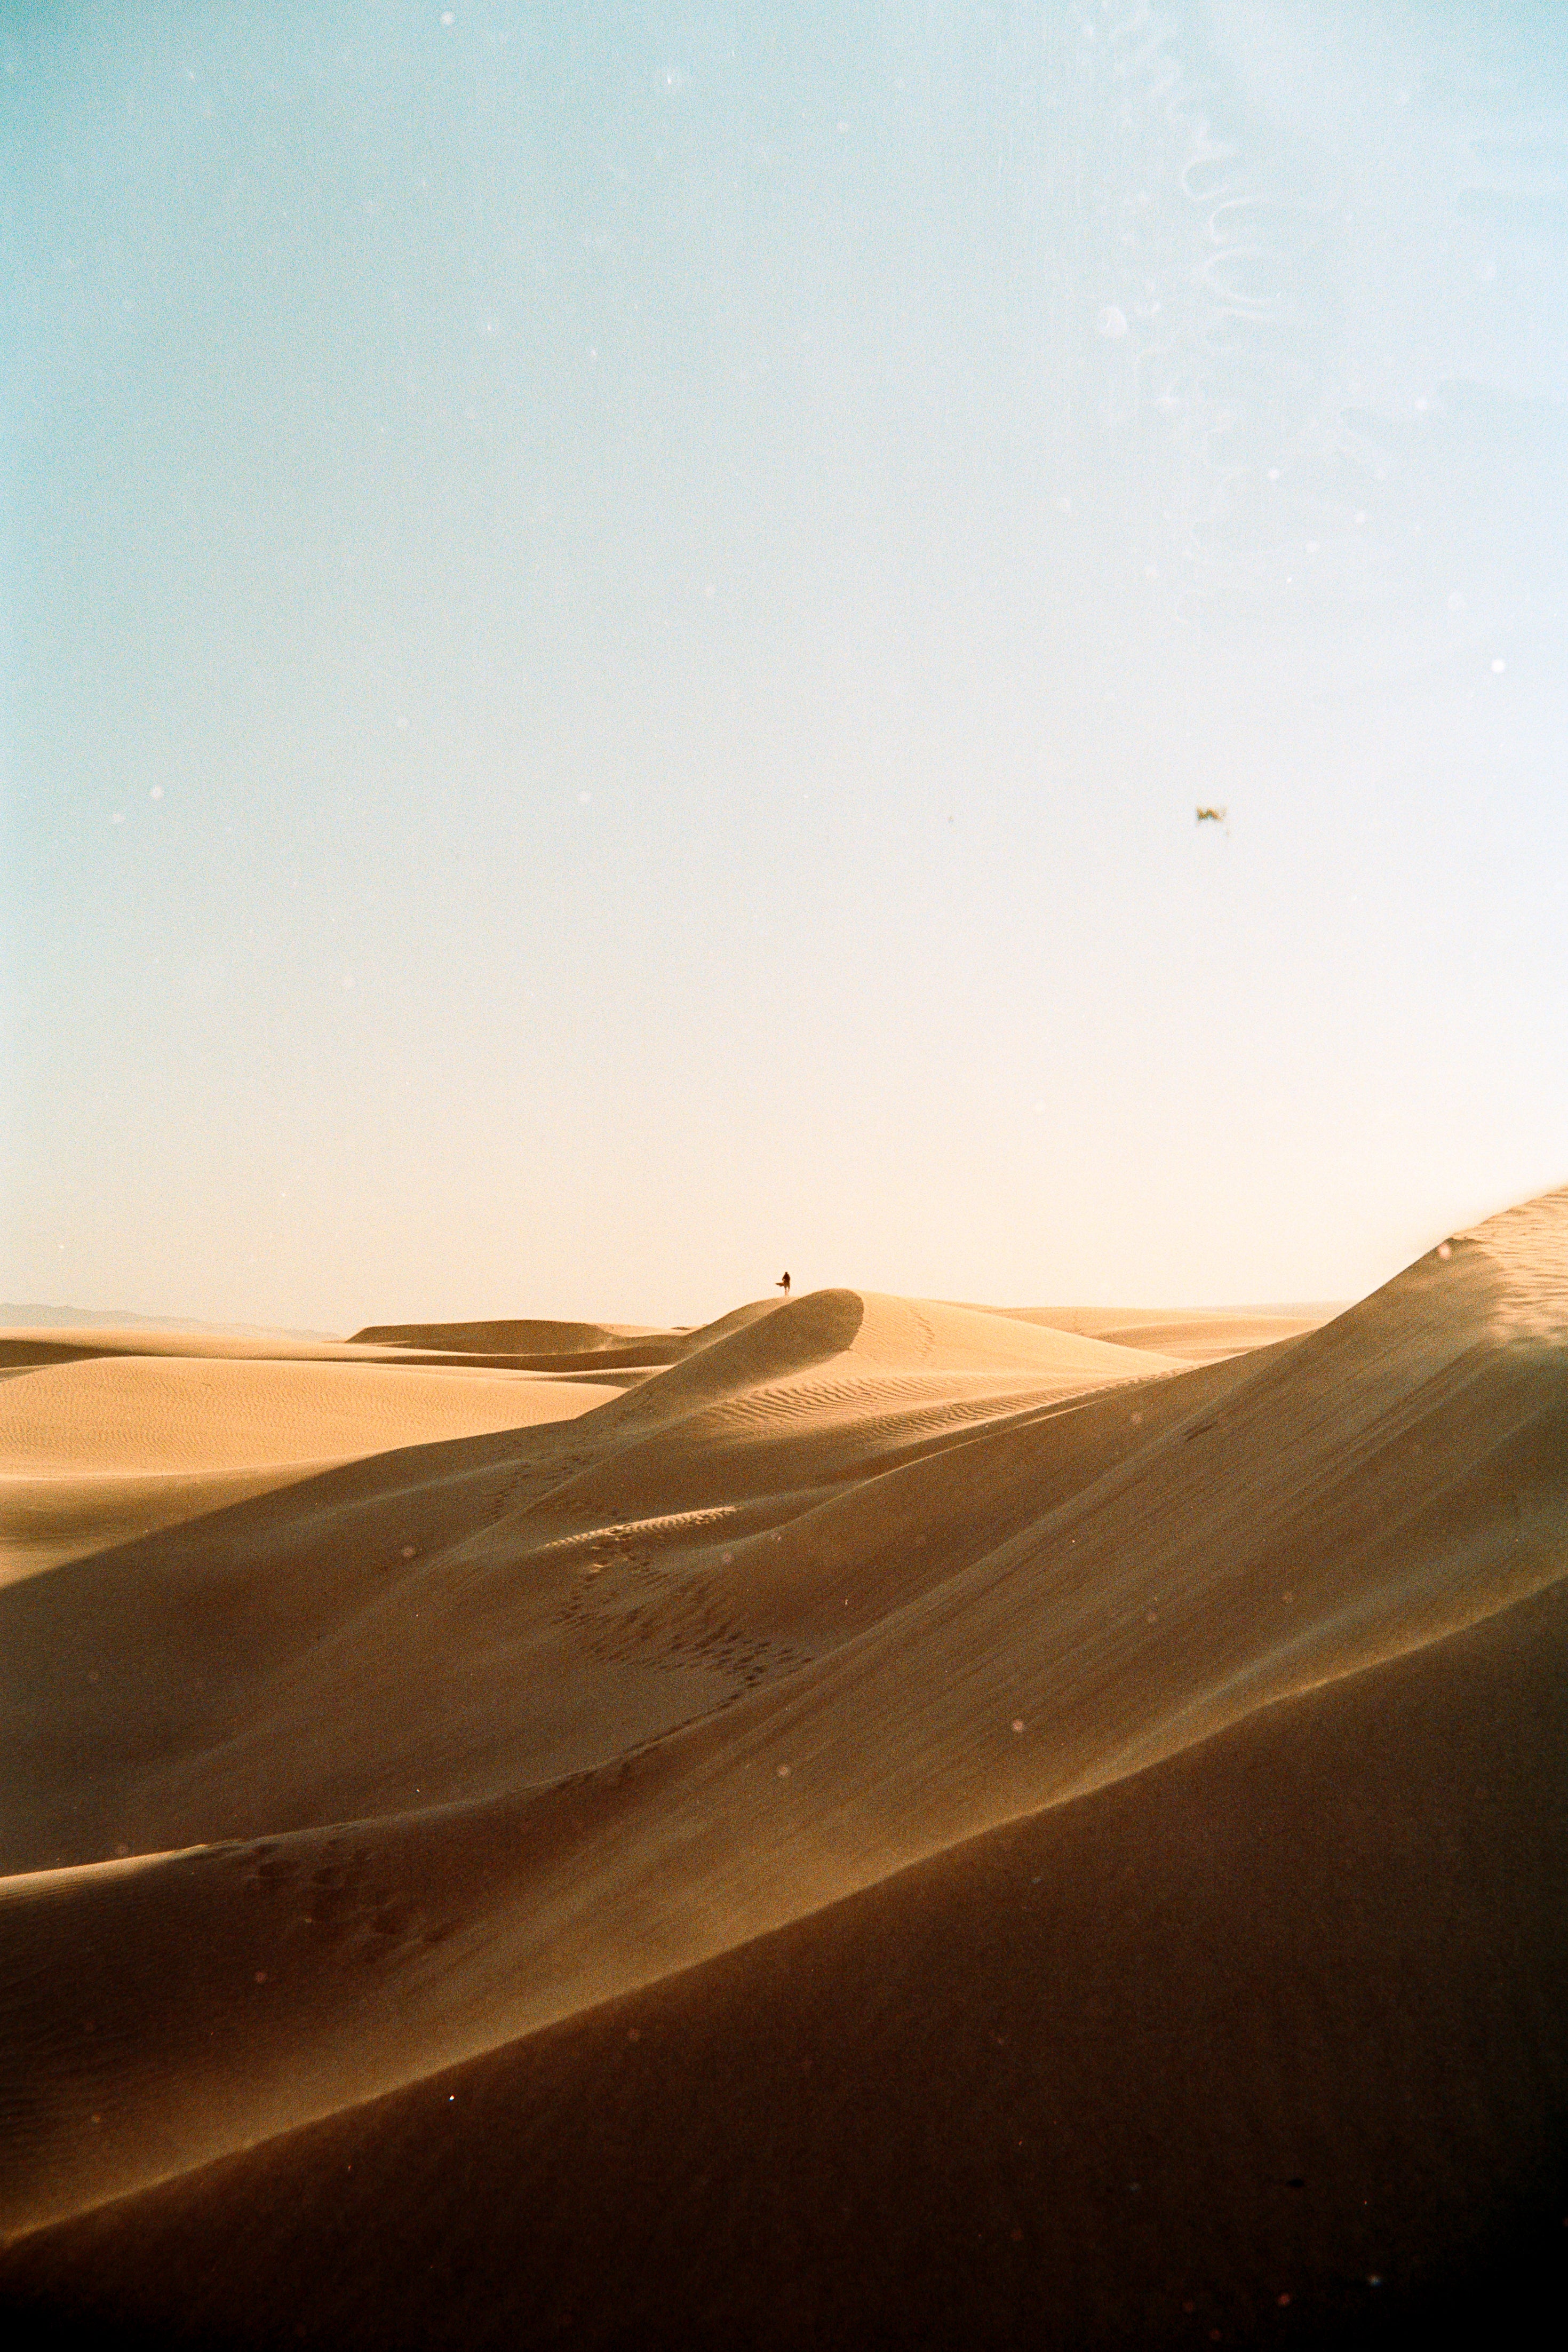 Sand dunes with a person walking